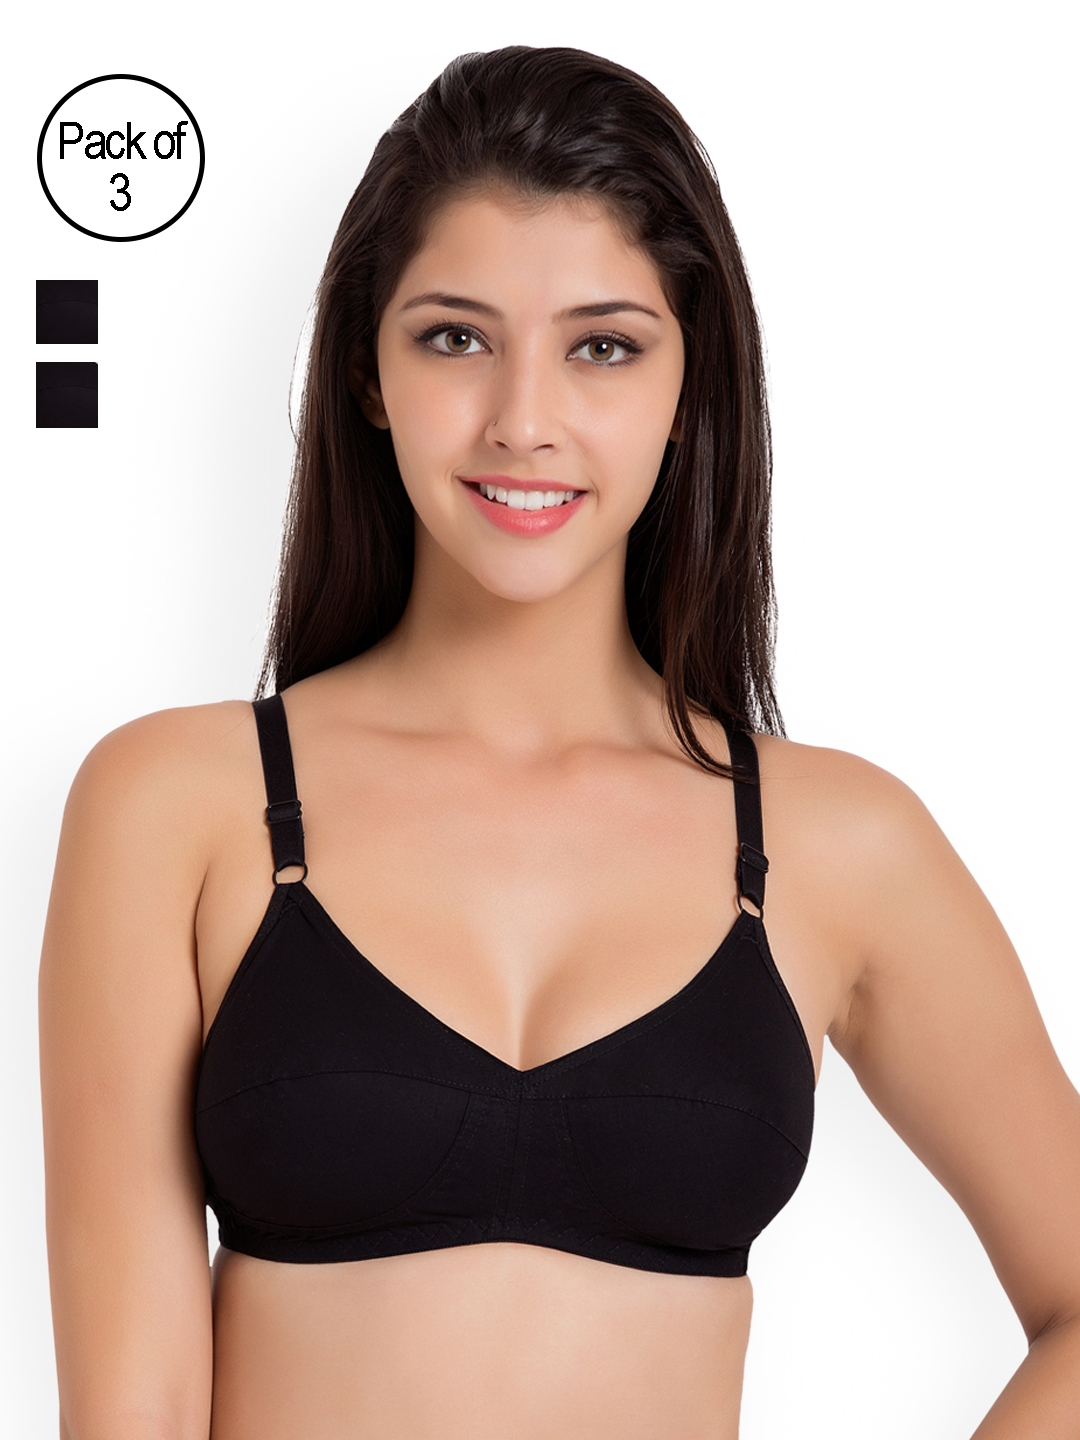 Buy SOUMINIE Women's Cotton Seamless Bra- Everyday Fit (Pink - 30B) at